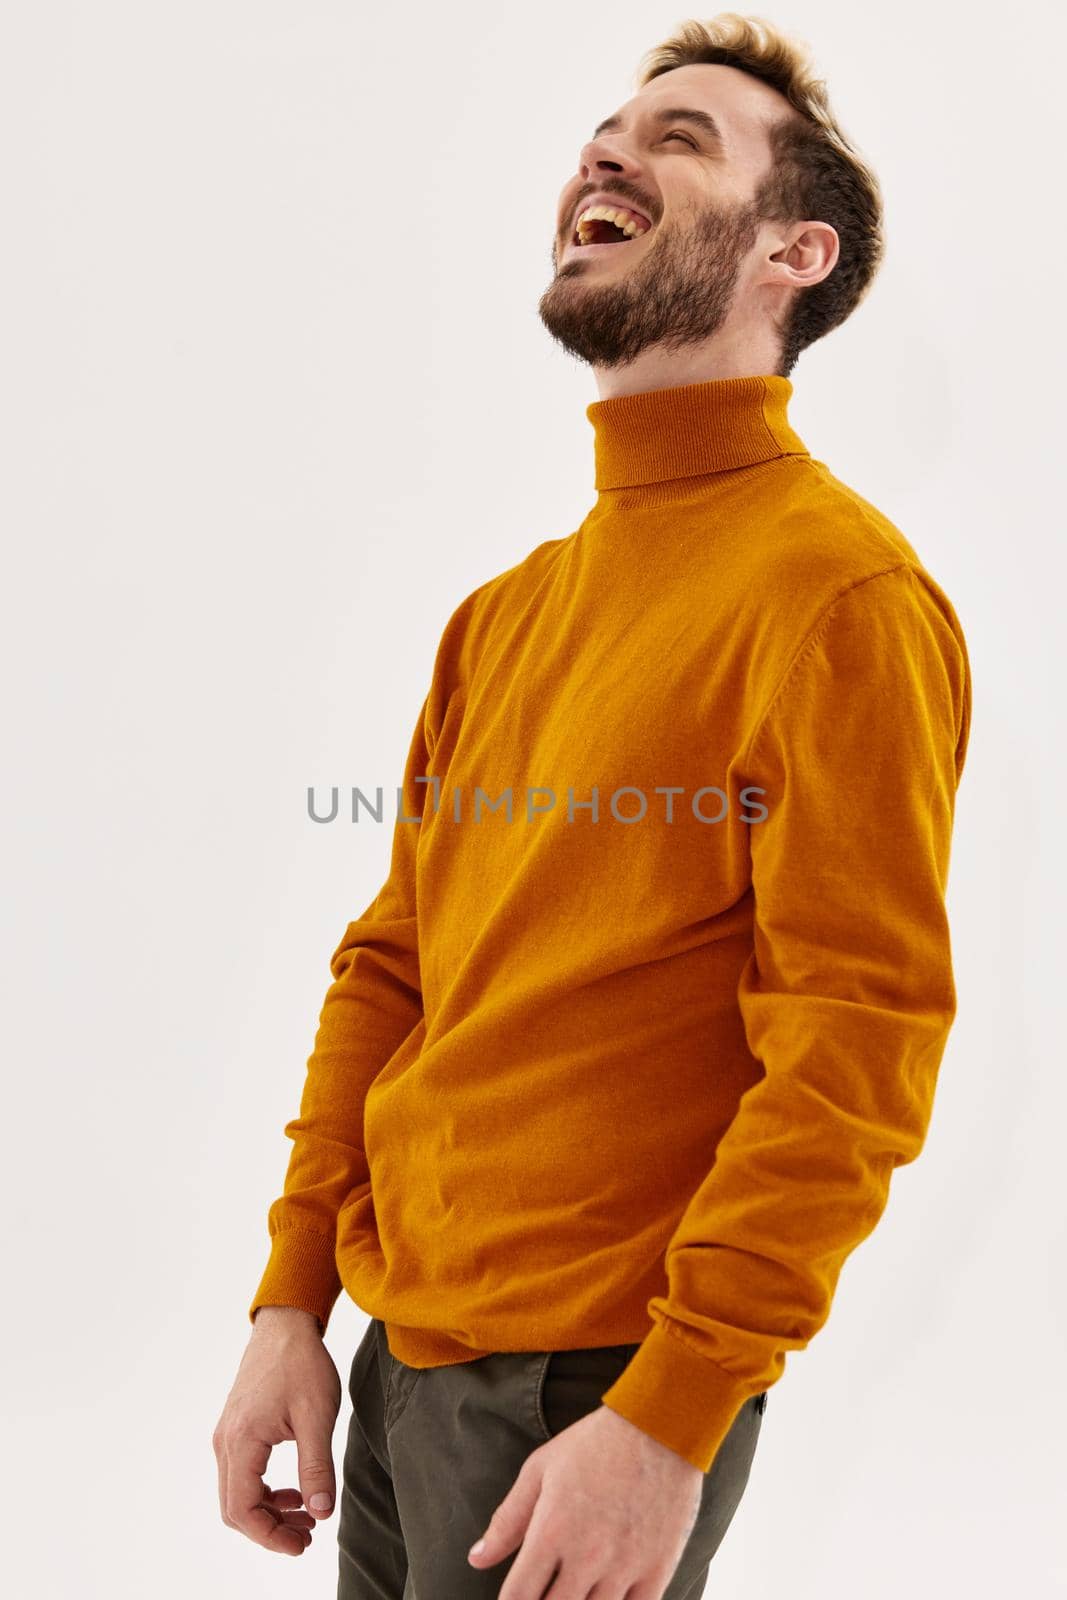 Cheerful man in autumn clothes fashion modern style cropped view. High quality photo